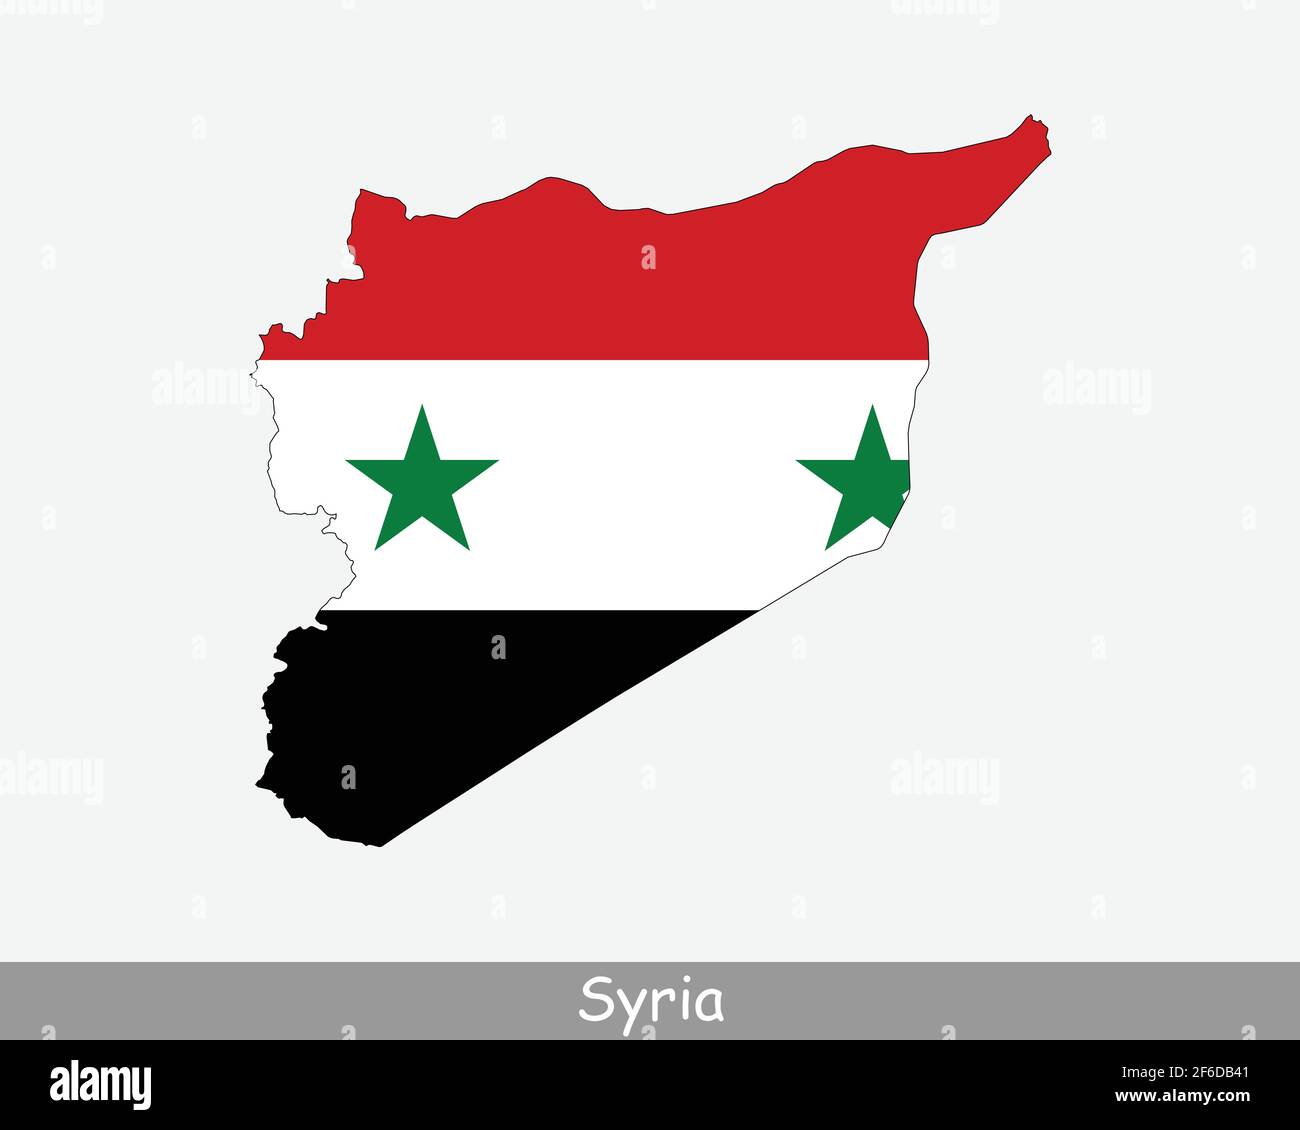 Syria Flag Map. Map of the Syrian Arab Republic with the Syrian national flag isolated on a white background. Vector Illustration. Stock Vector